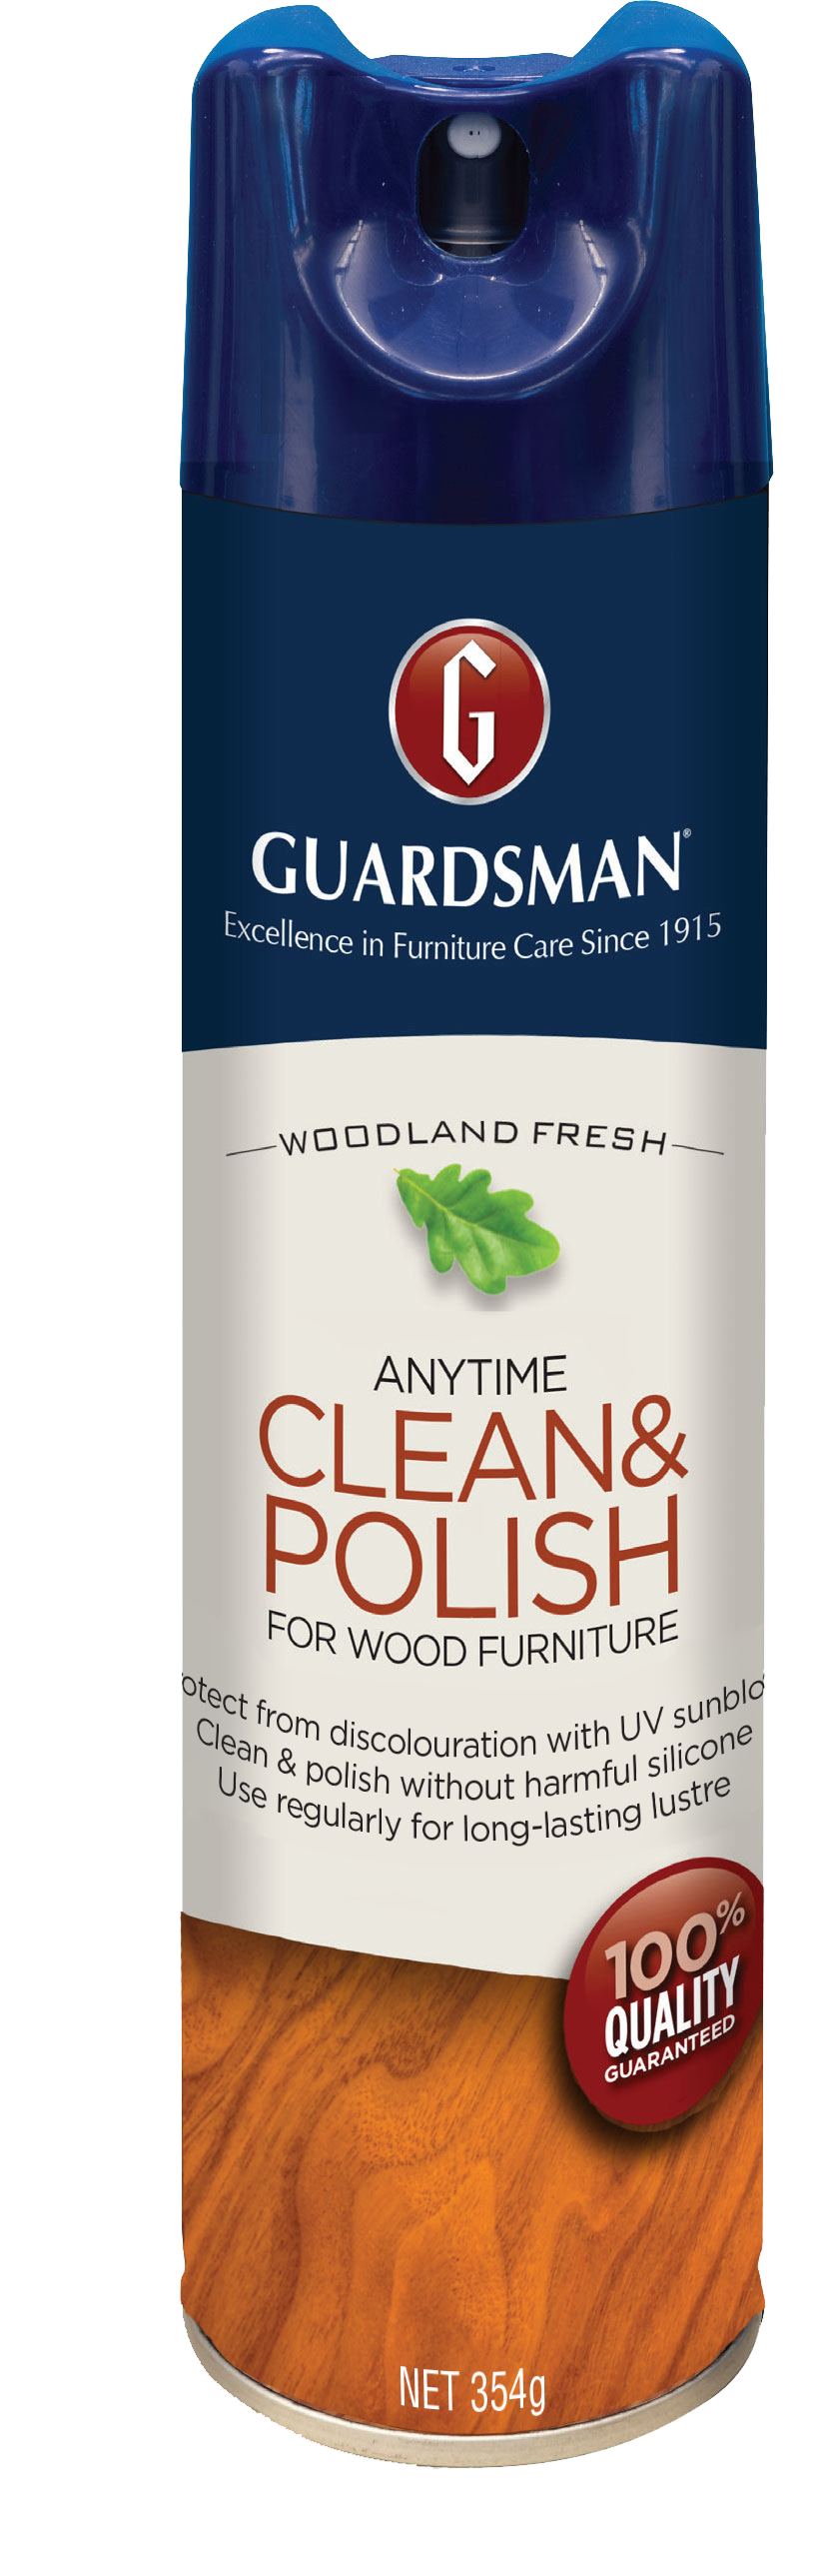 Wood Clean & Polish Featured Image